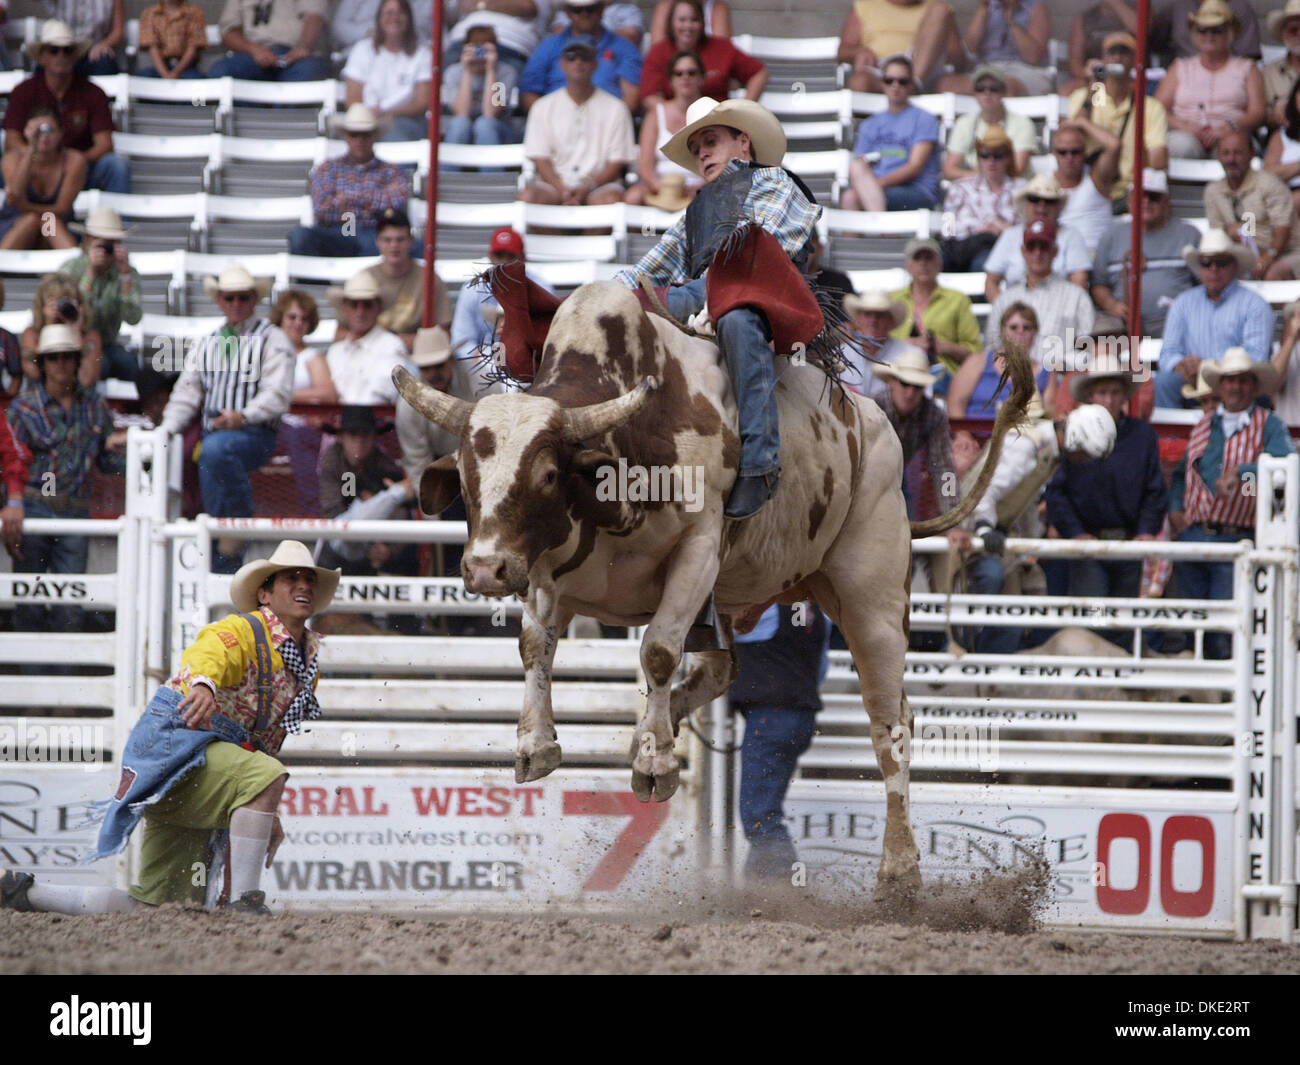 Jul 23, 2007 - Cheyenne, WY, USA - The Cheyenne Frontier Days Rodeo, called the 'Daddy of 'em All,' is the world's largest outdoor rodeo with approximately 1,800 contestants and the regular season's largest total purse whic is expected to reach USD 1,000,000. Pictured: JIMMY CROSBY of Azle, Texas competes in the Bull Riding event. (Credit Image: © Don Senia Murray/ZUMA Press) Stock Photo